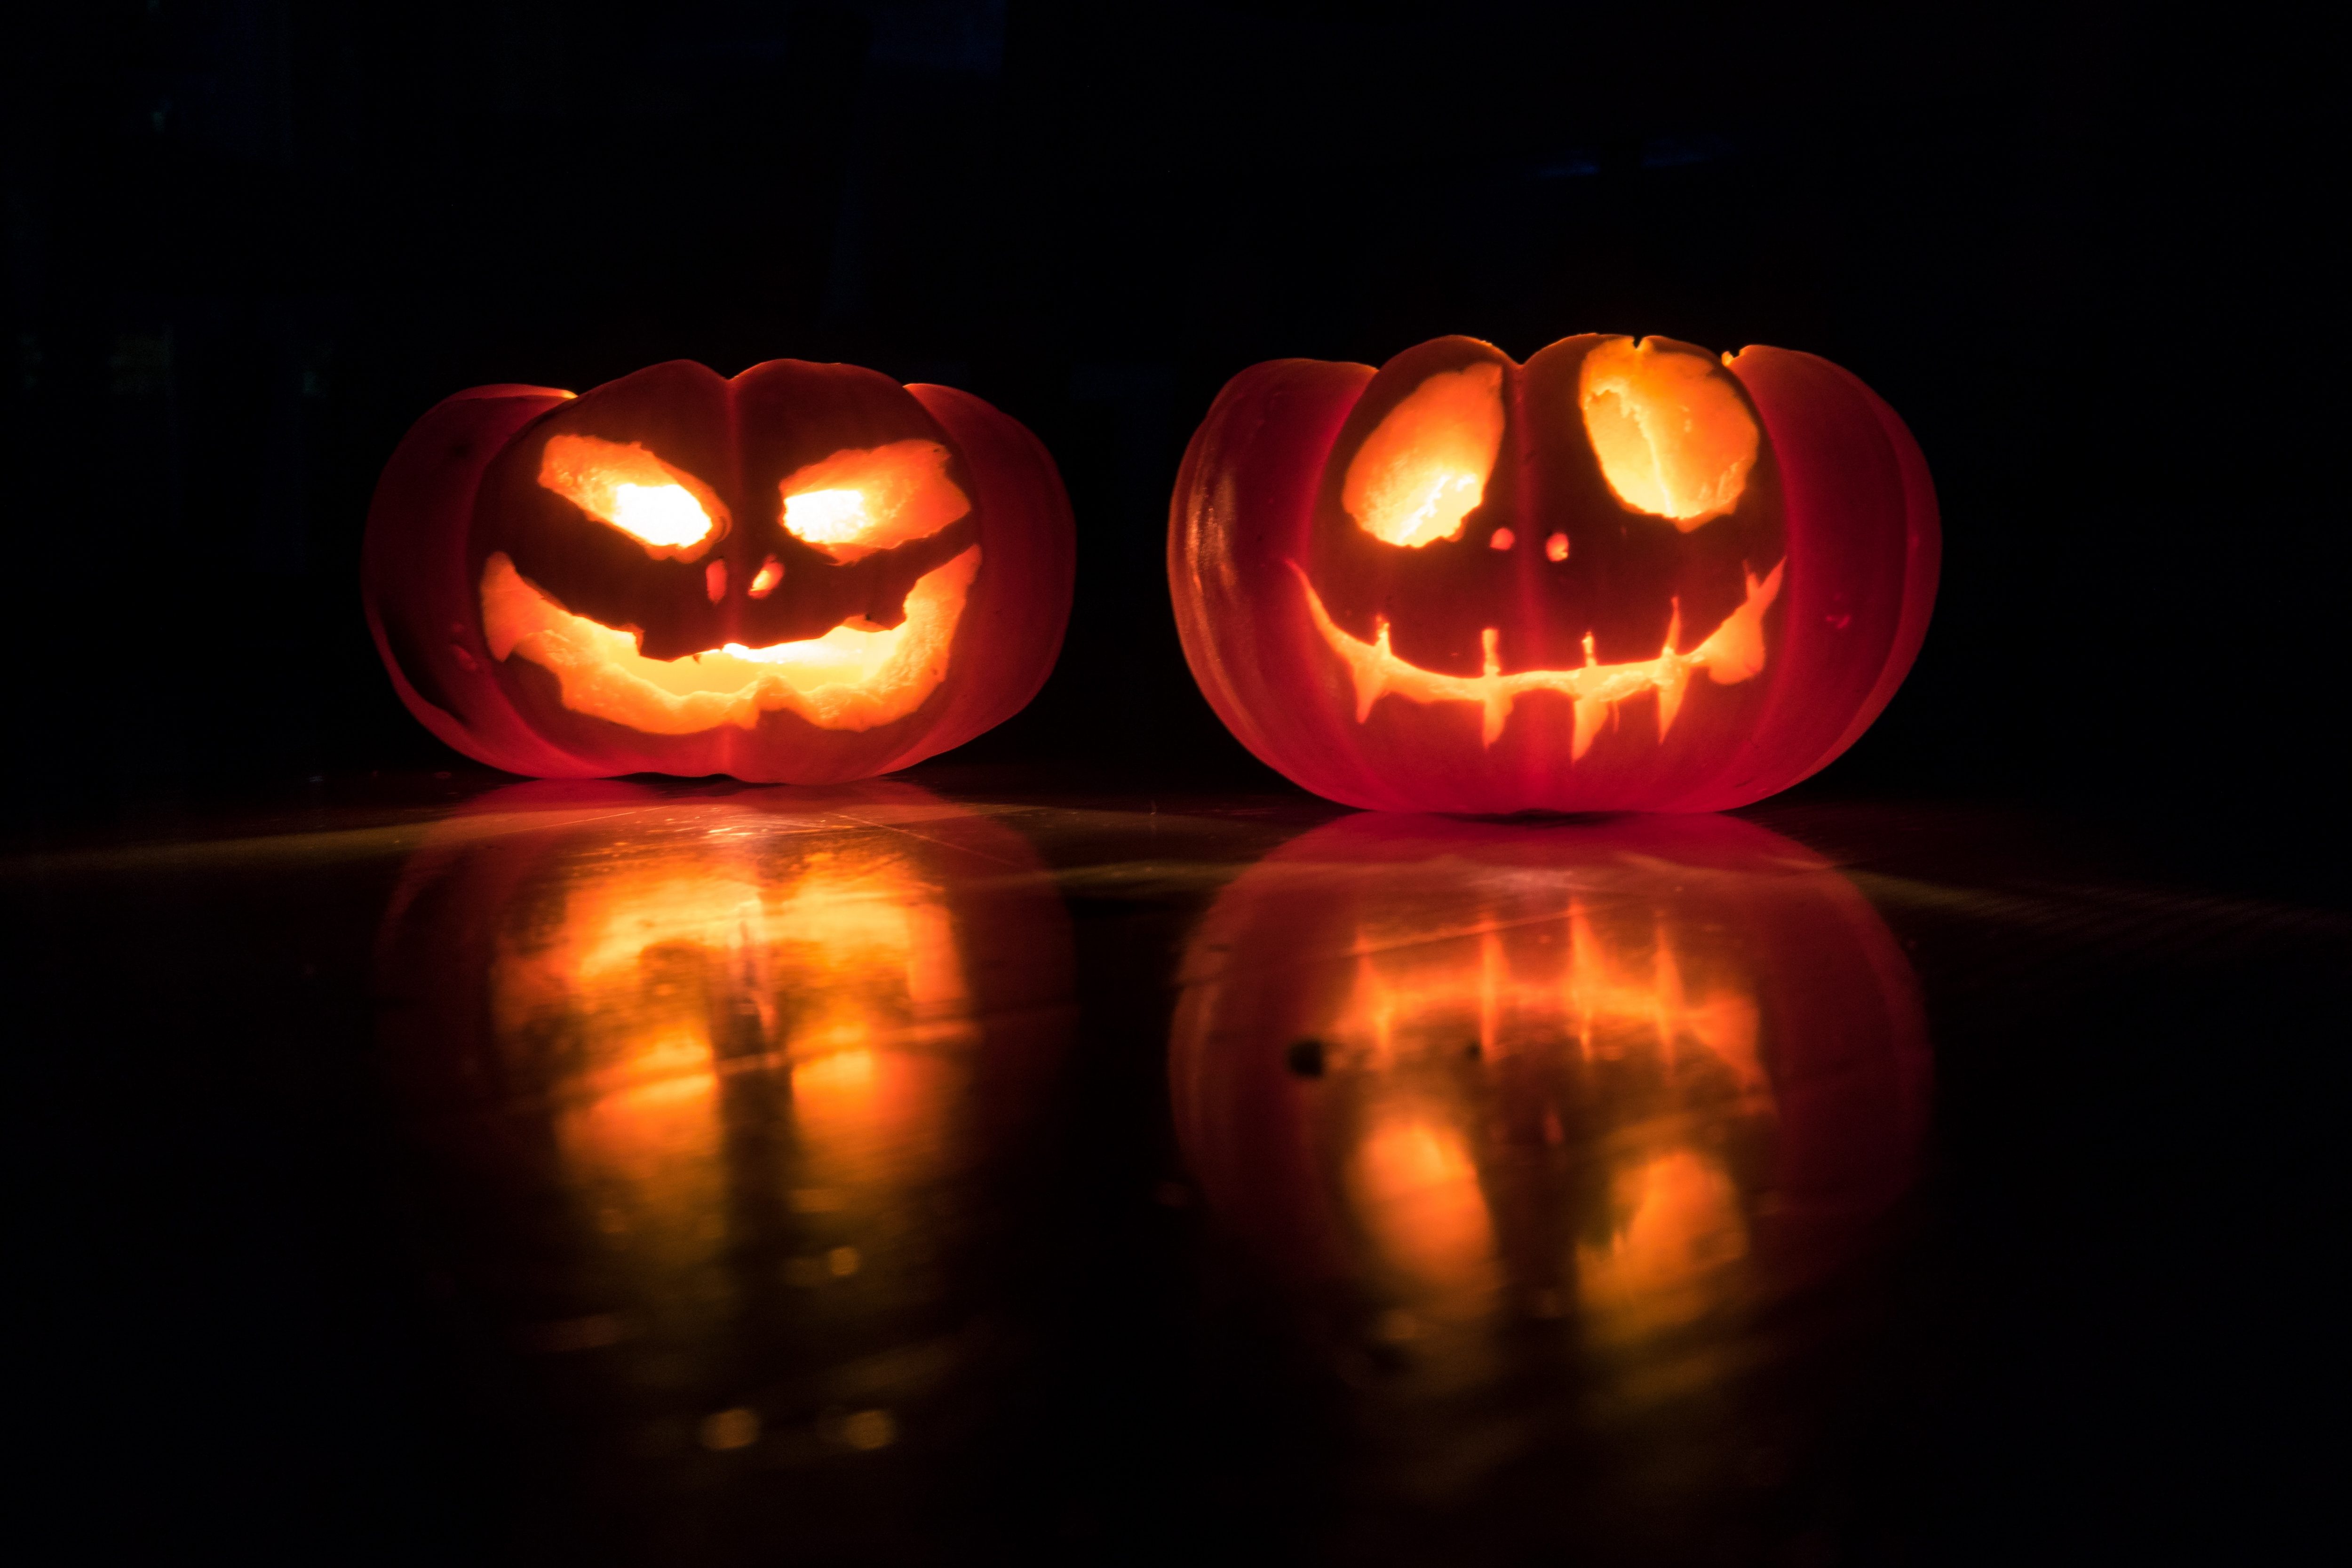 "For me, Halloween encompasses so much more than just one day. It’s a month long celebration, marked by many annual traditions", writes Morgan Neering. Pic: David Menidrey on Unsplash.com.